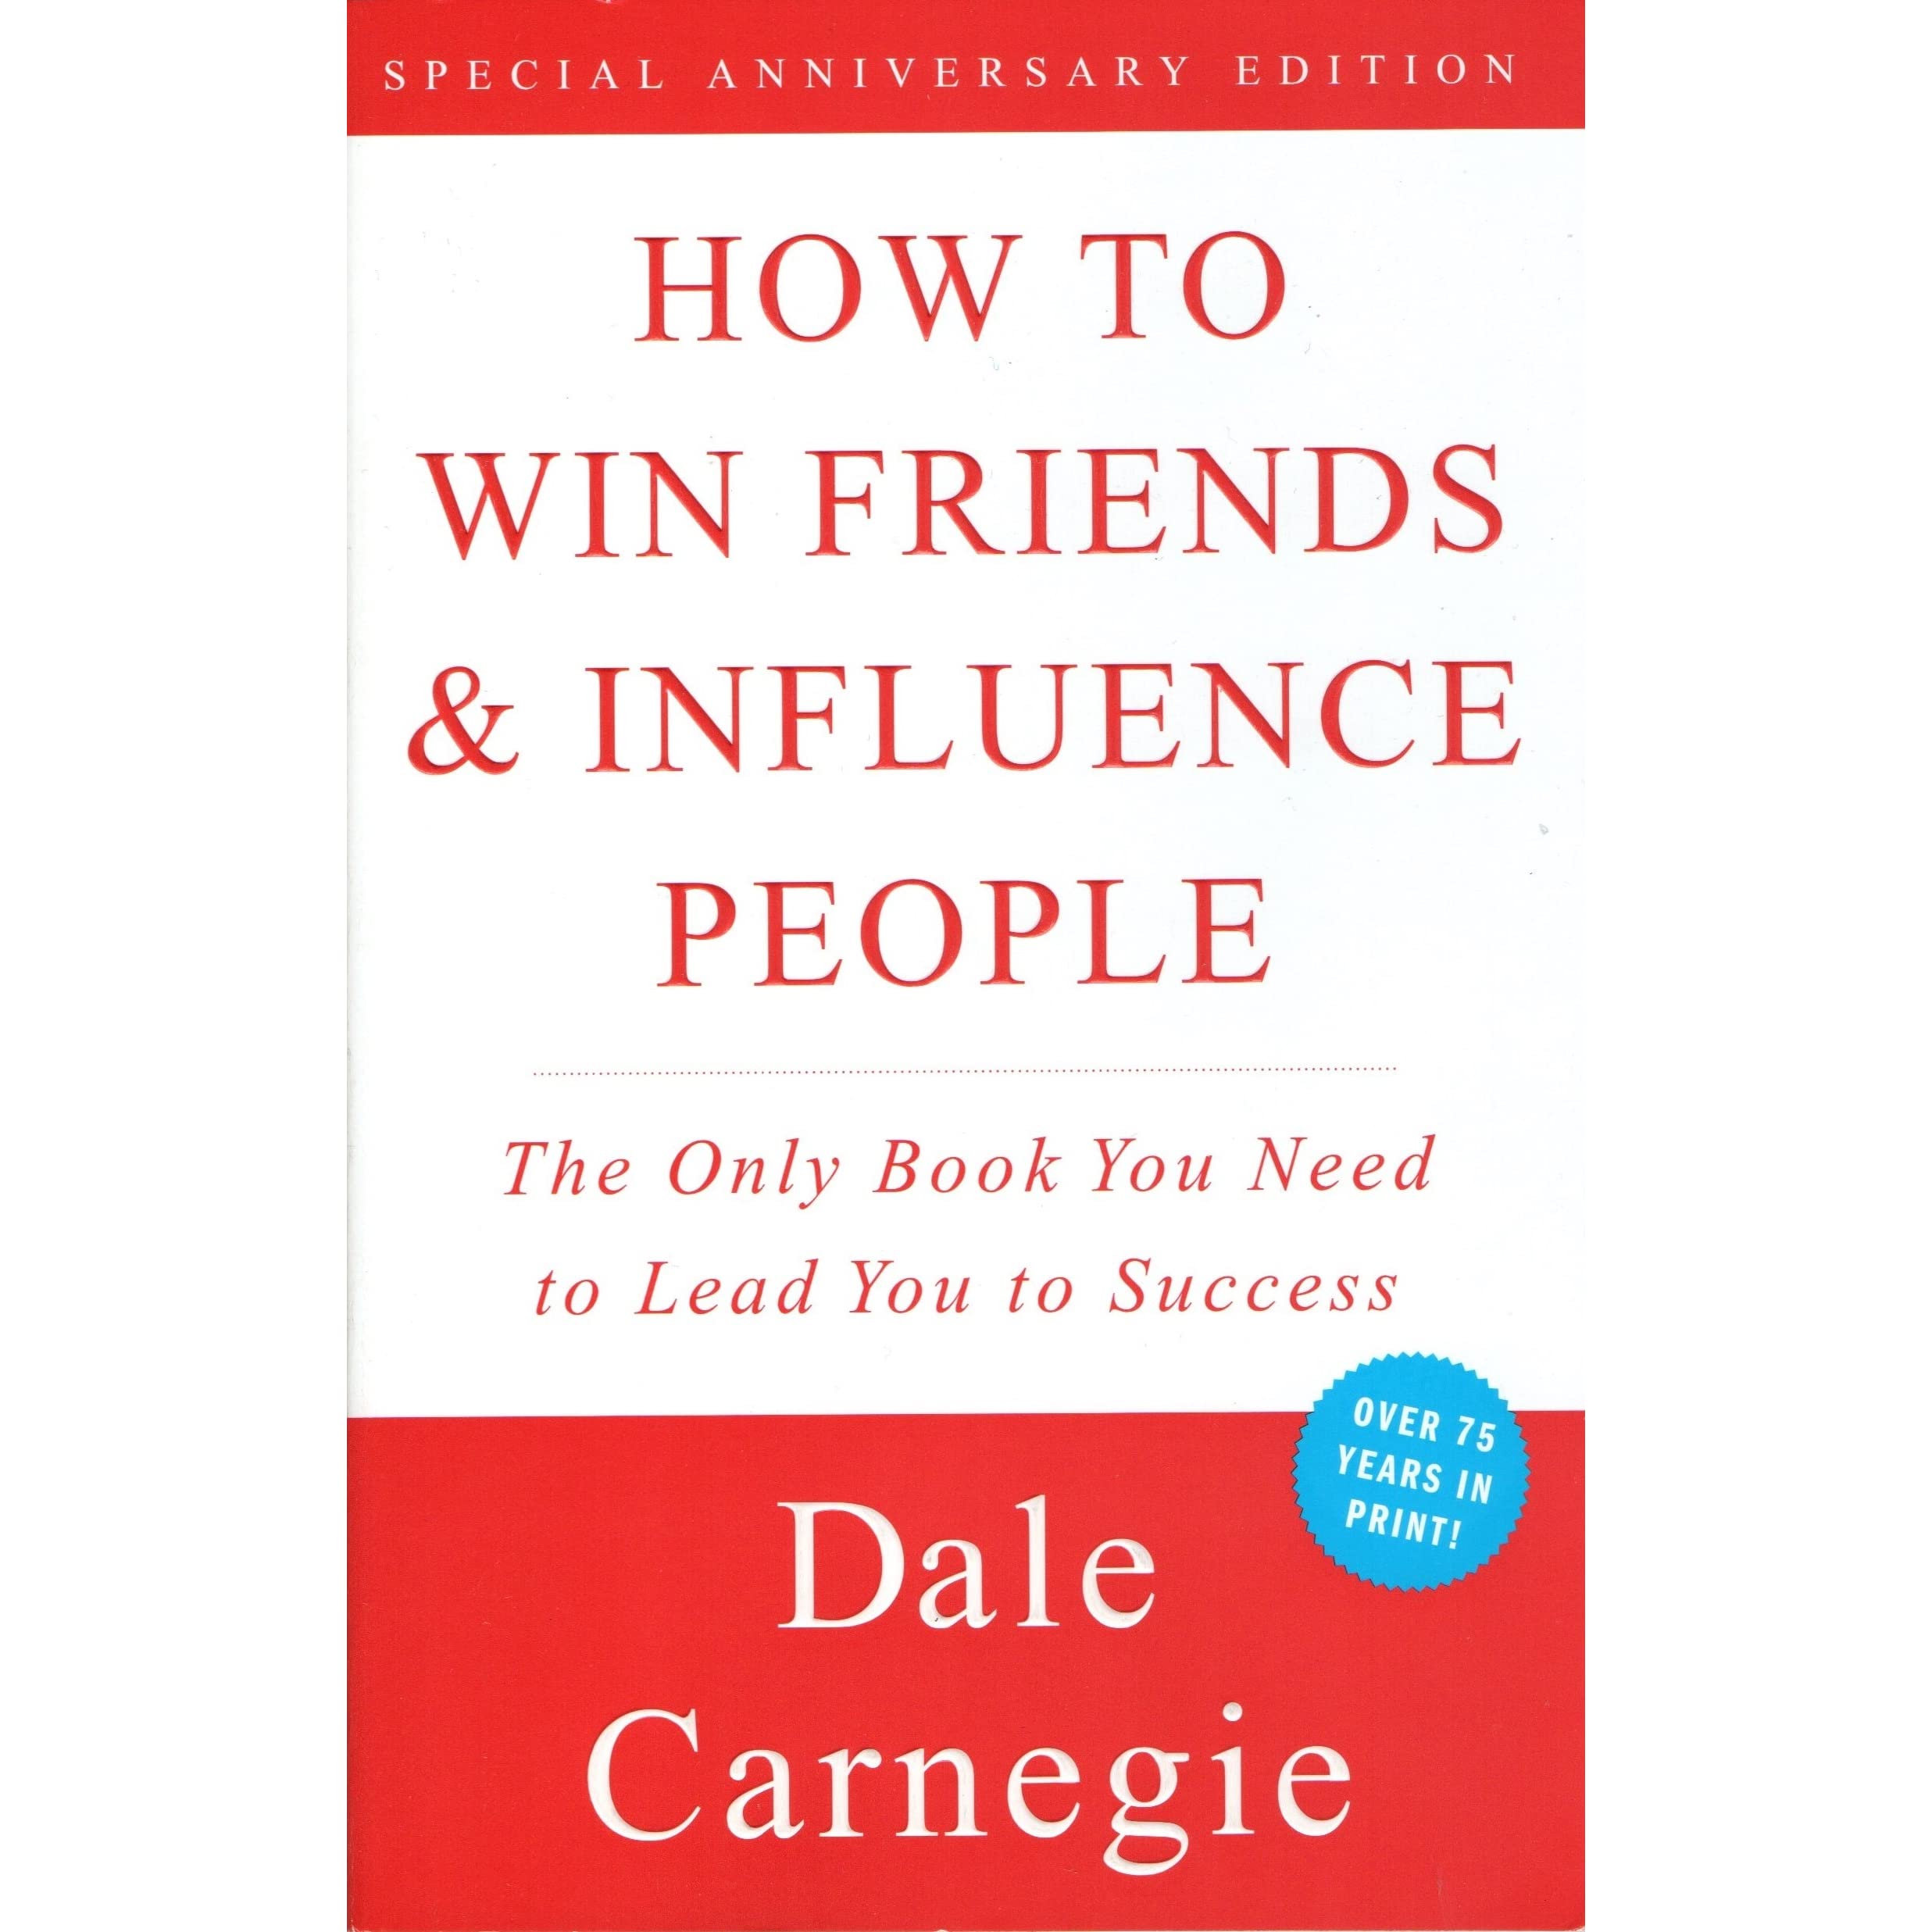 Ask Me Anything About <i>How to Win Friends and Influence People</i>